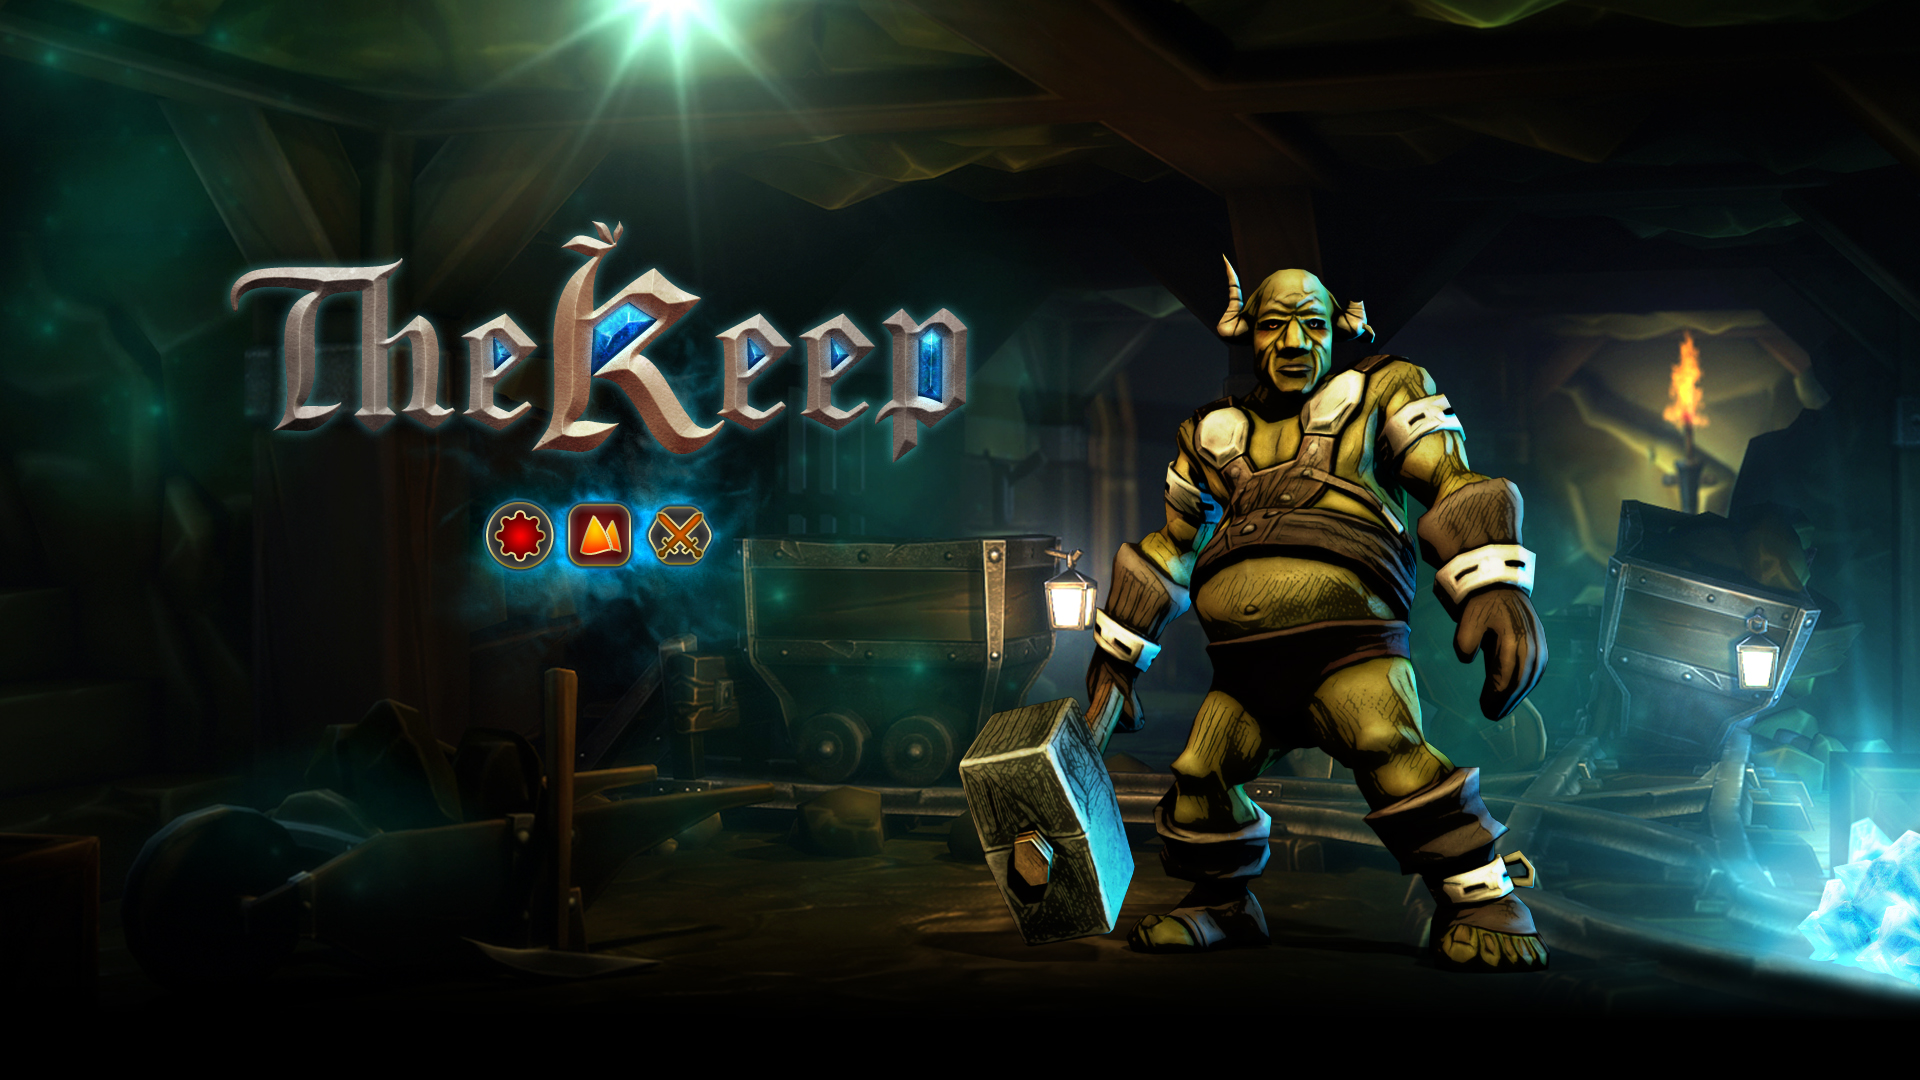 TheKeep_Banner_1920x1080.png